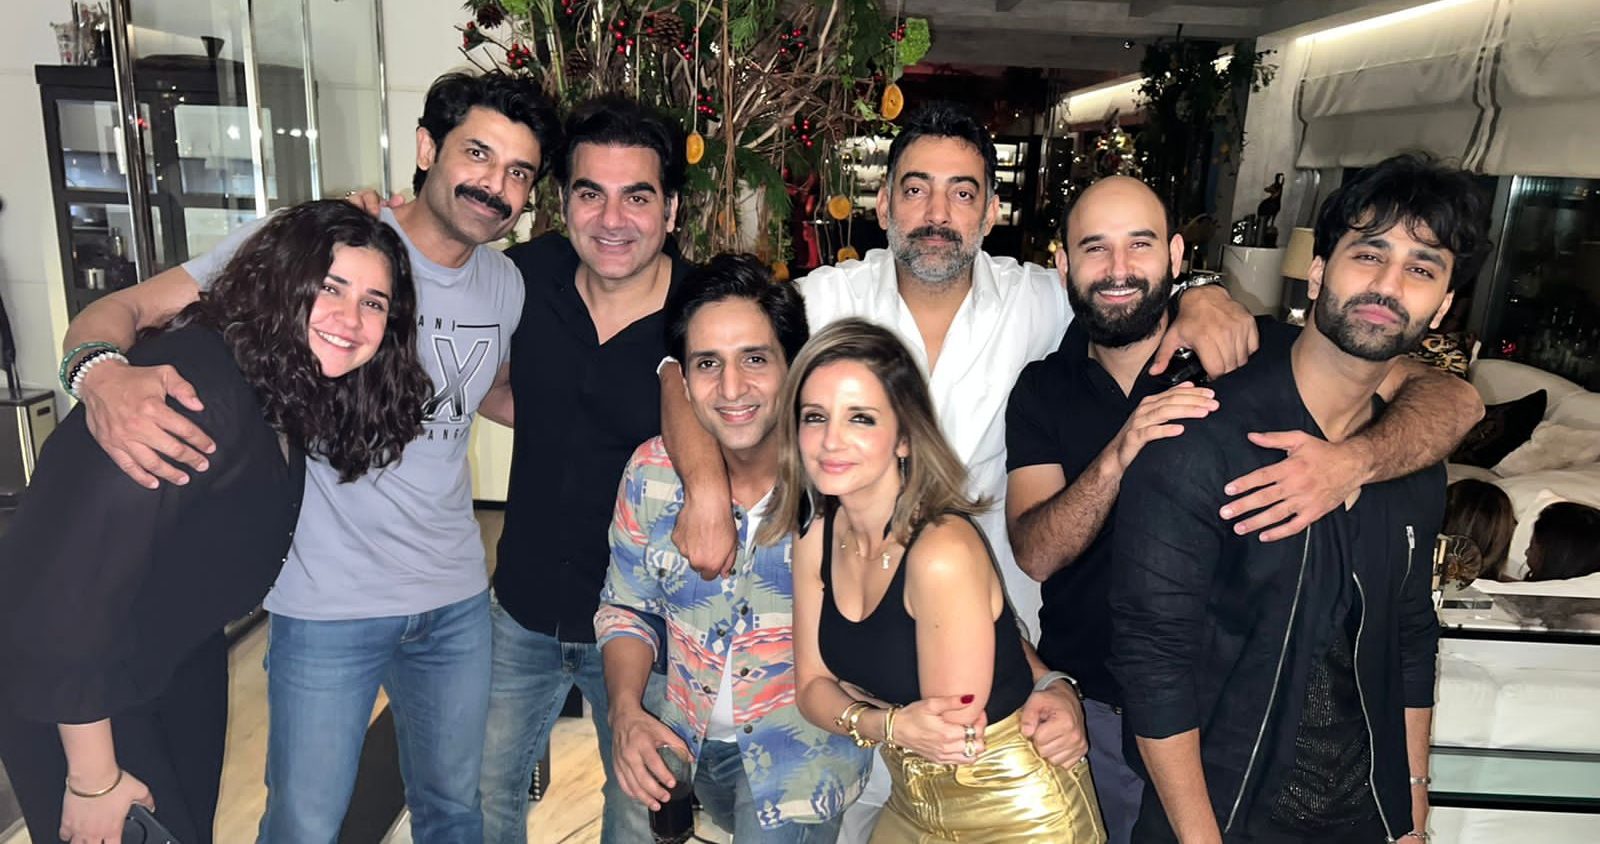 Starry affair at Arslan Goni’s birthday get-together!